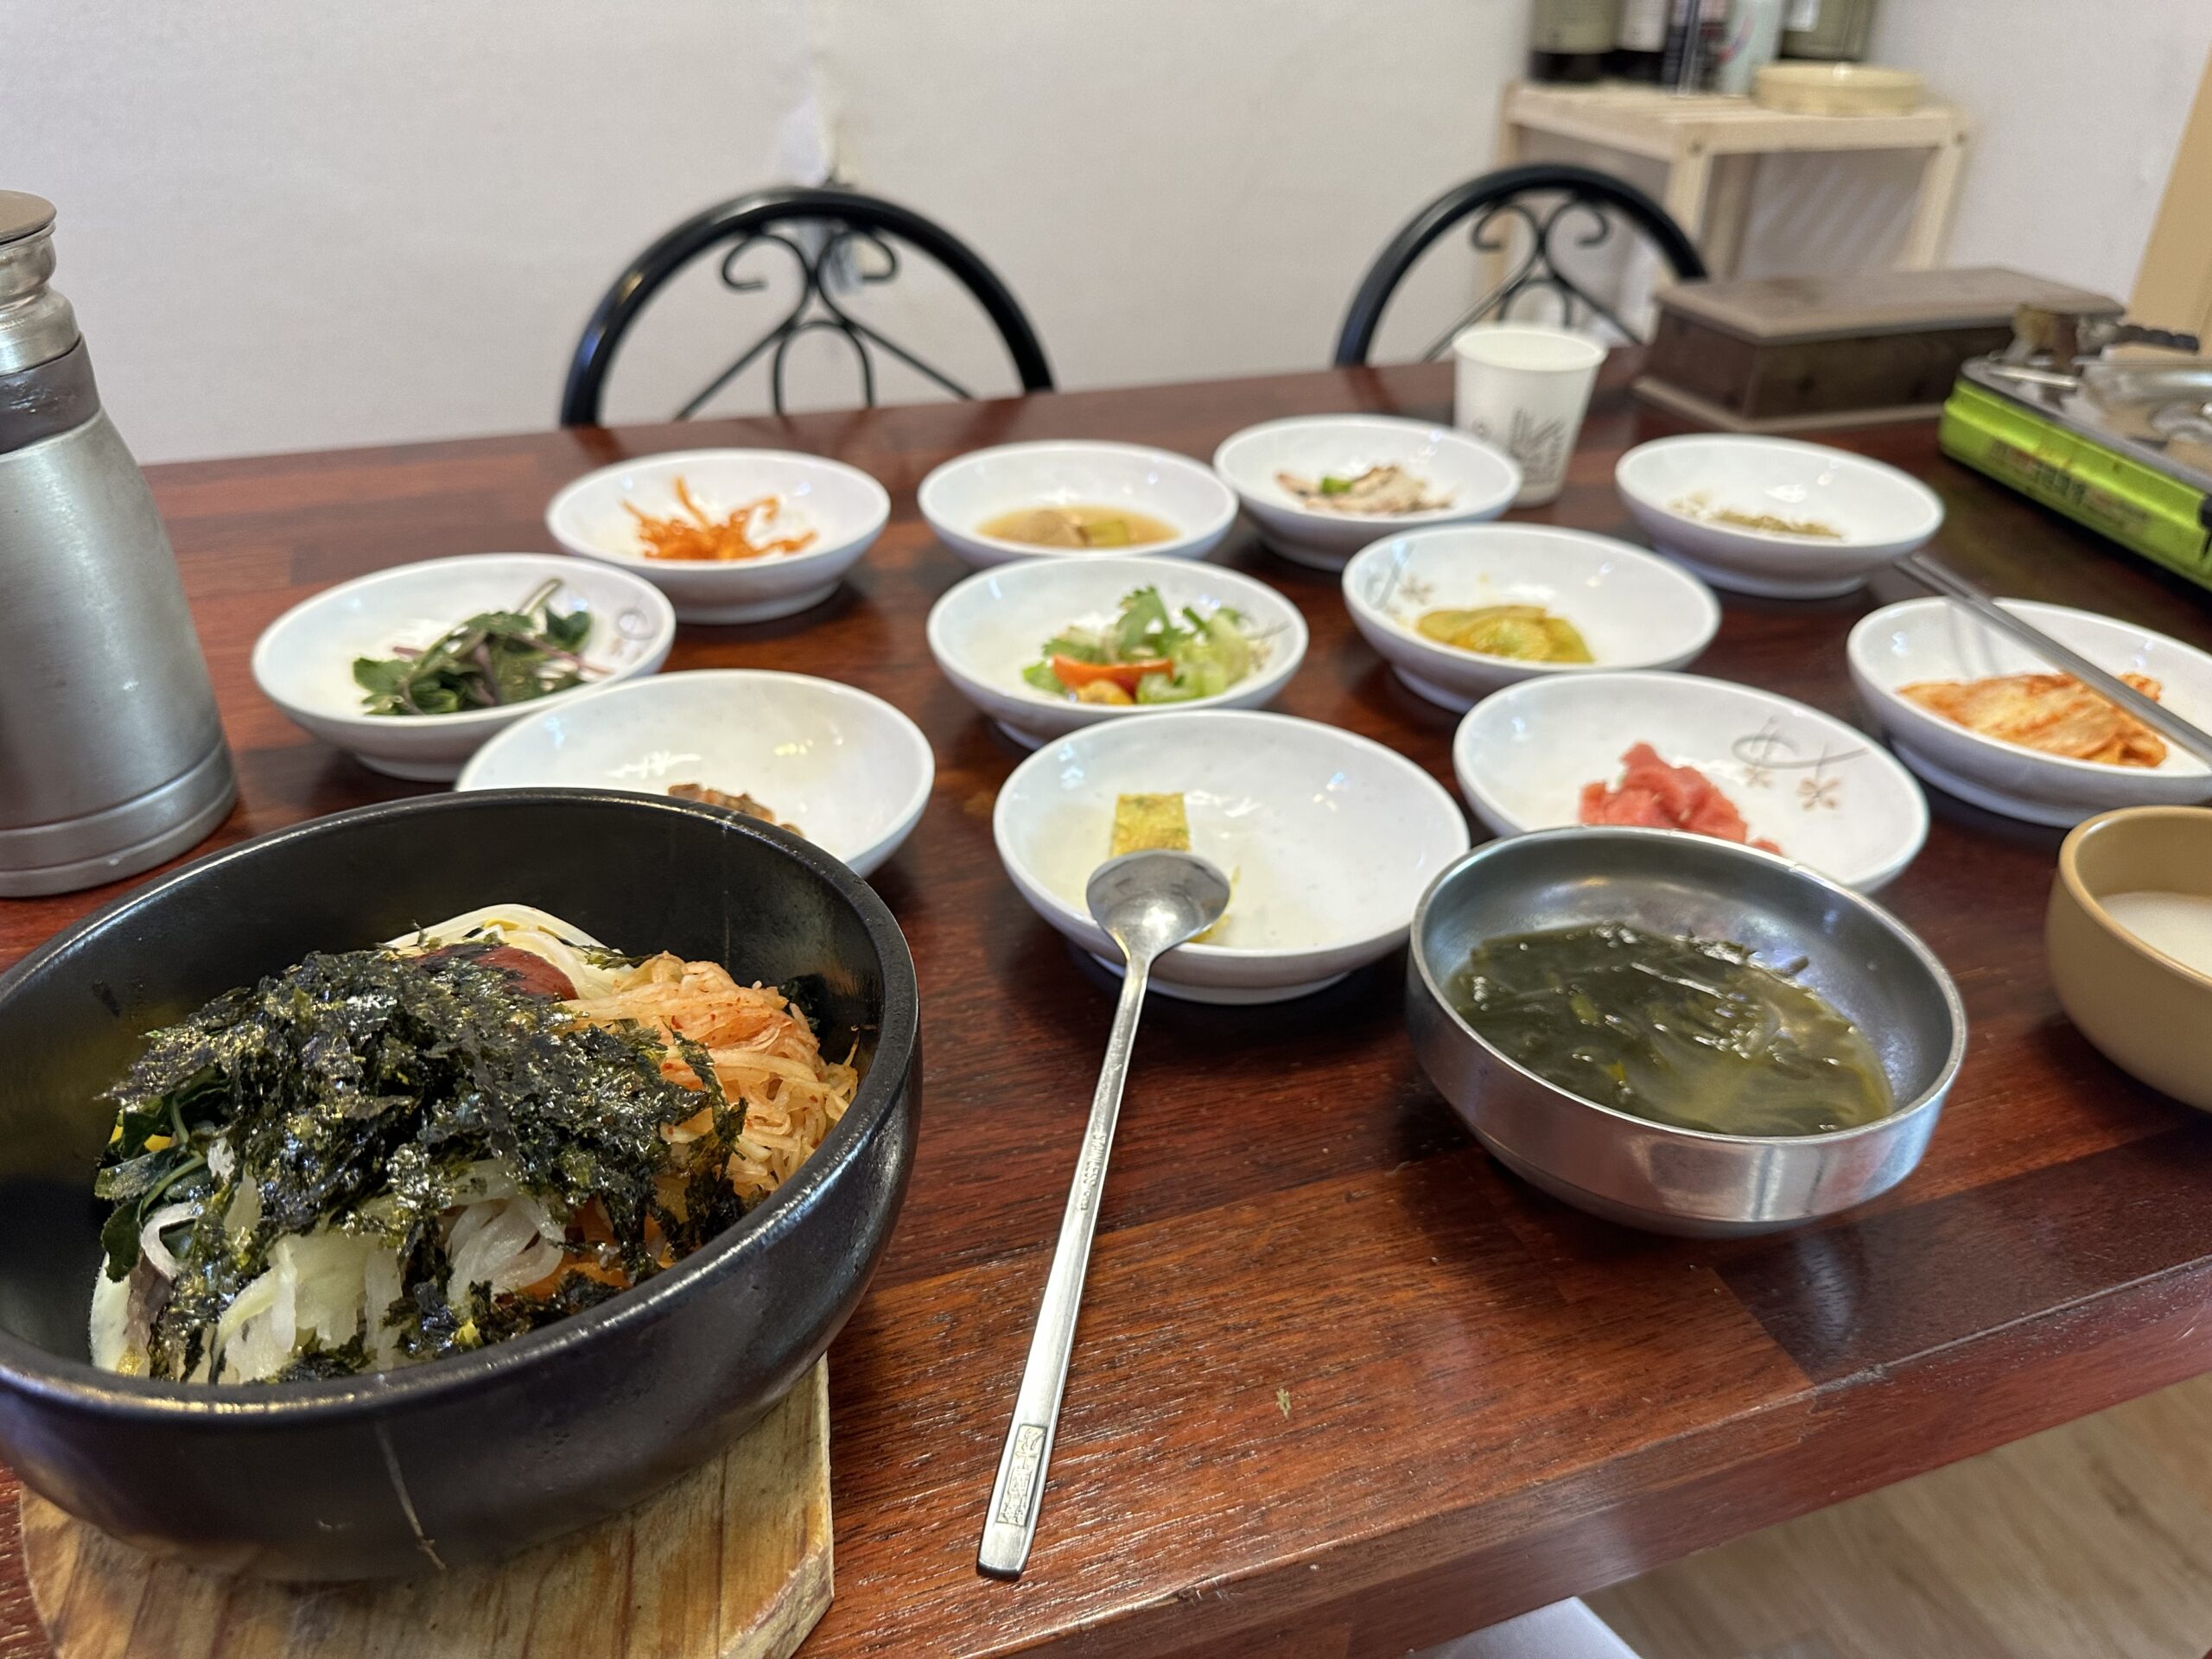 Bibimbap with banchan (side dishes) for lunch.